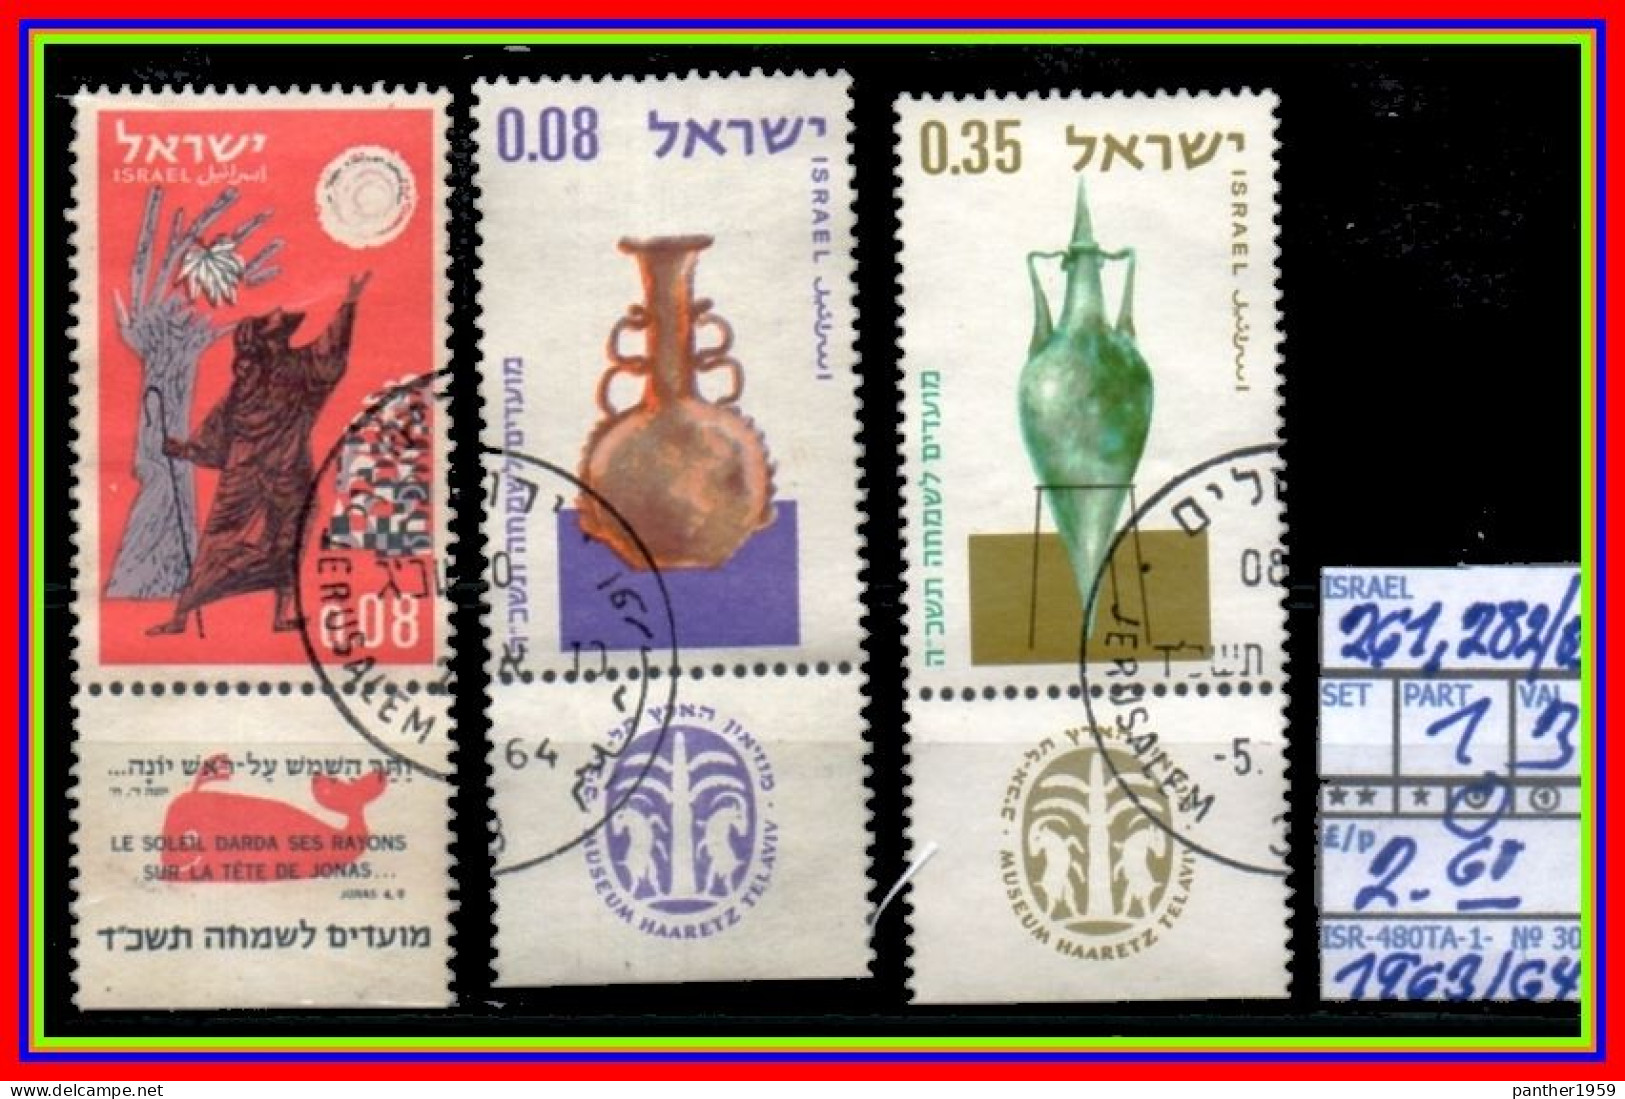 ASIA# ISRAEL# #COMMEMORATIVE SERIES WITH TABS# USED¤ (ISR-280TA-1) (30) - Oblitérés (avec Tabs)